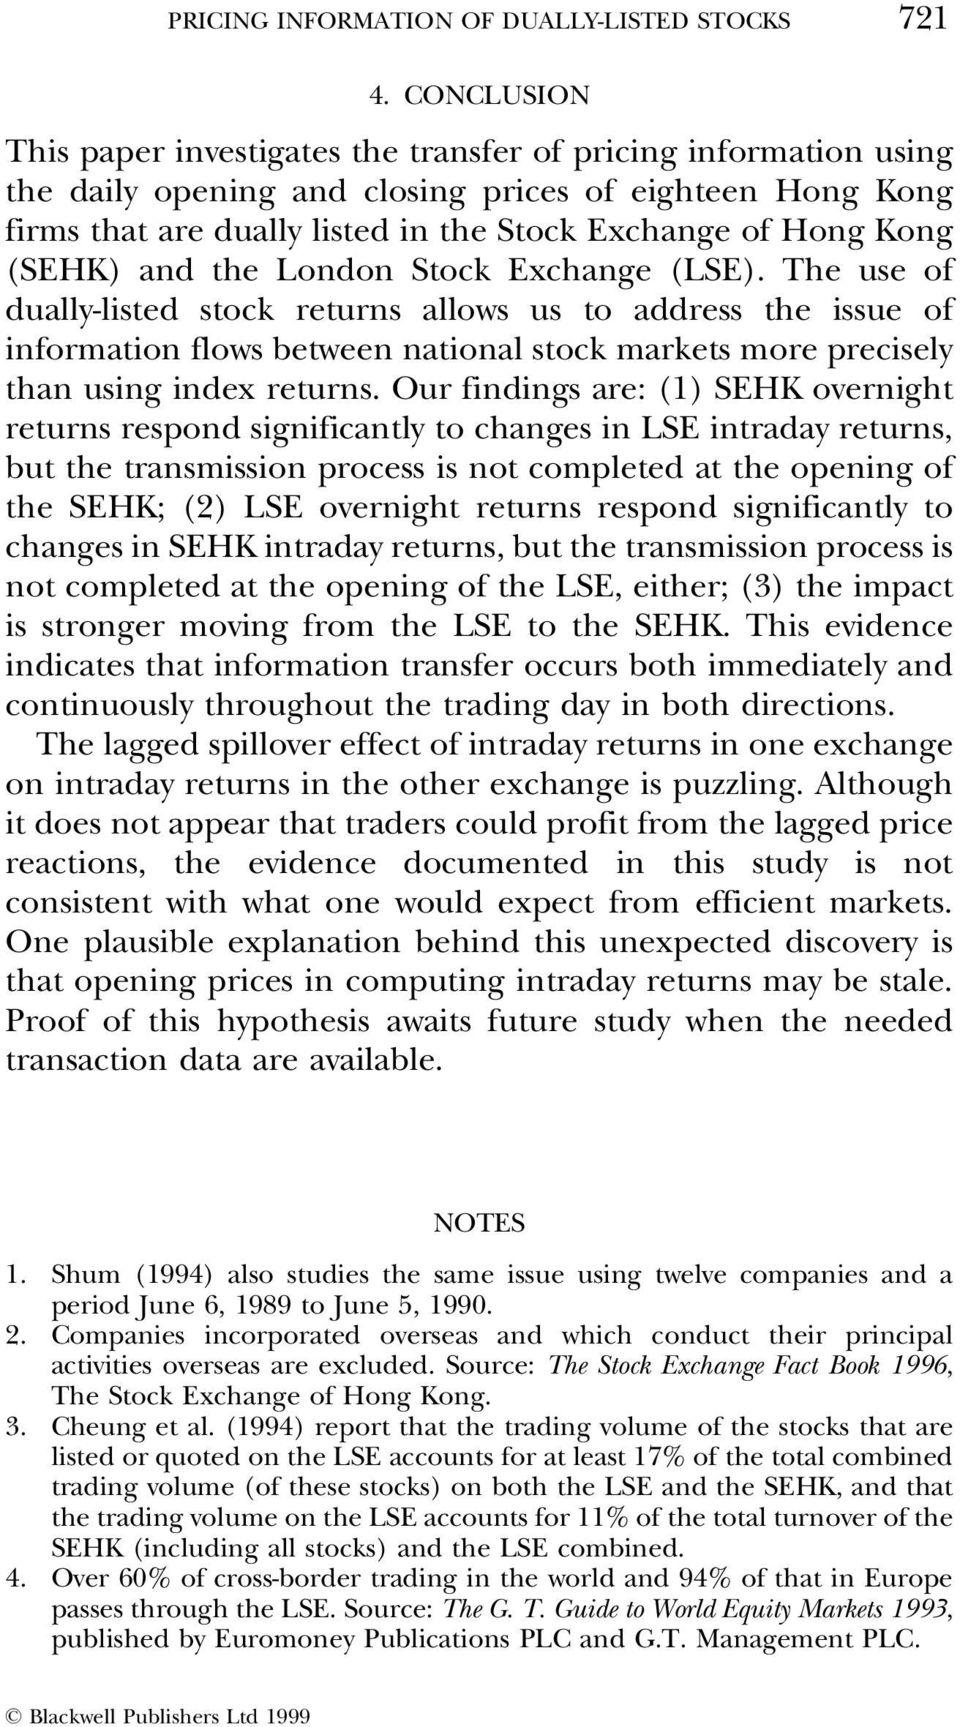 London Sk Exchange (LSE). The use of dually-lised sk reurns allows us o address he issue of informaion flows beween naional sk markes more precisely han using index reurns.